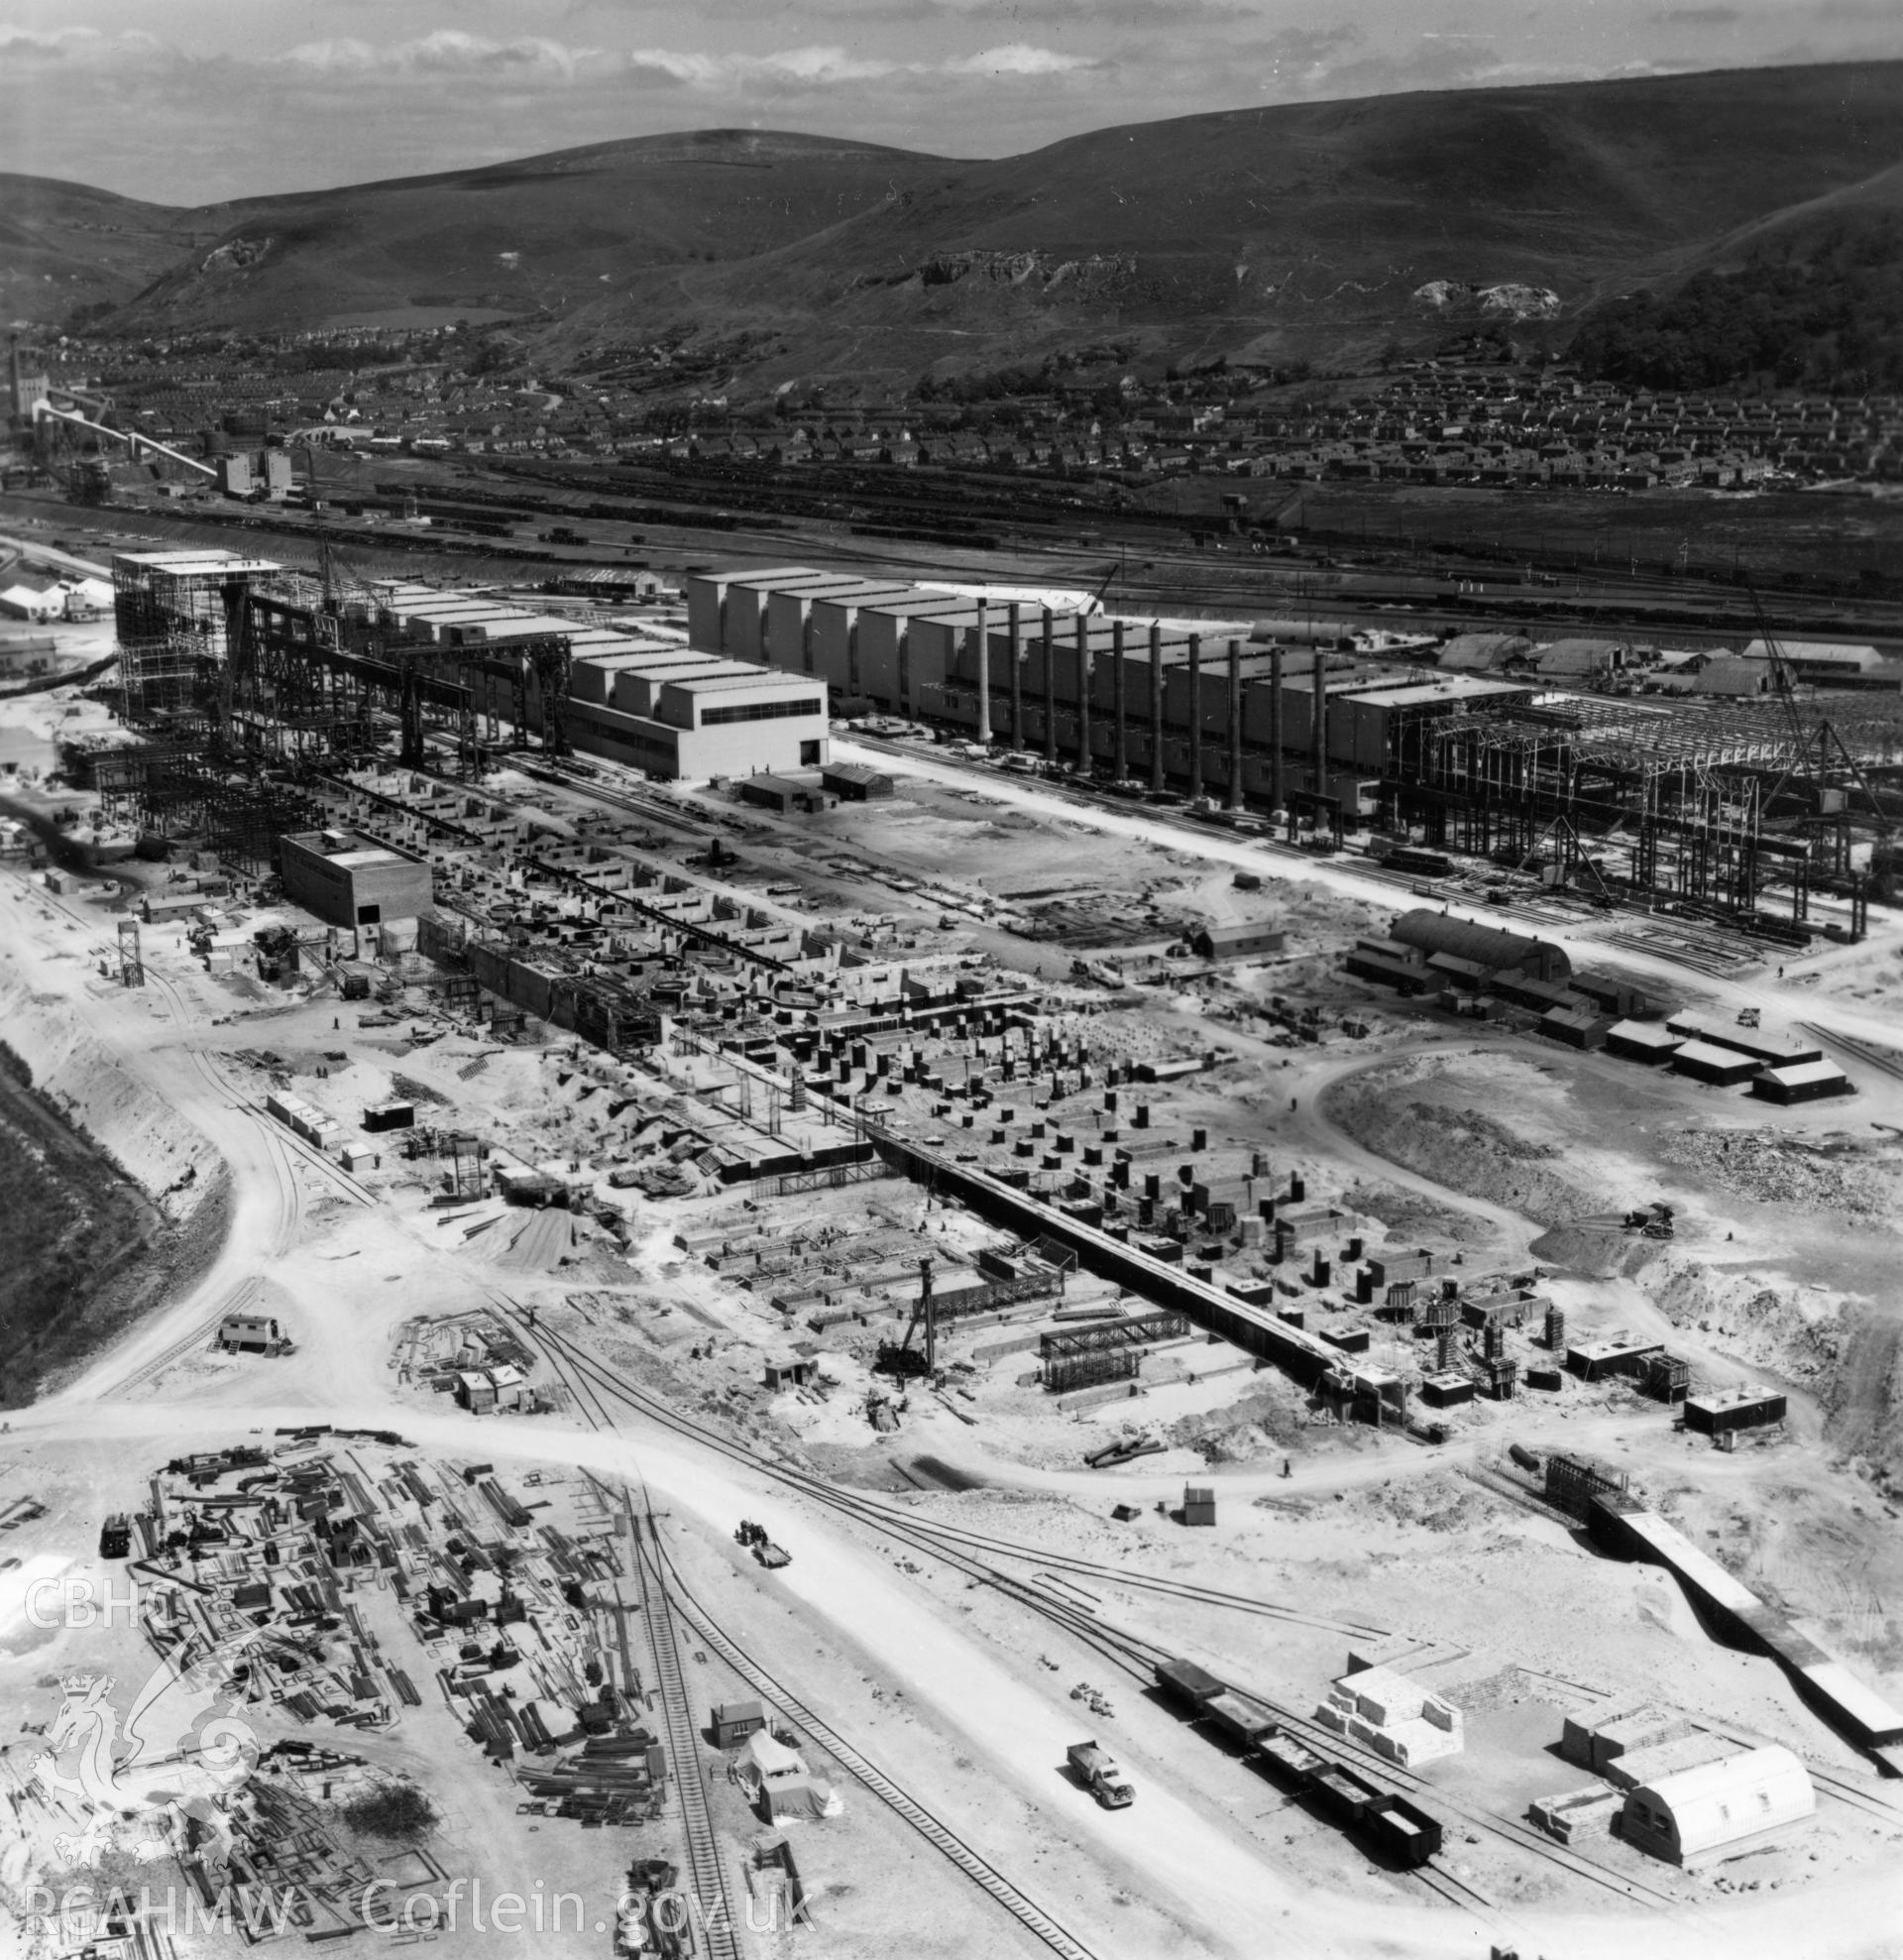 General view of Abbey Steelworks under construction, with Port Talbot in the distance. Oblique aerial photograph, 5?" cut roll film.